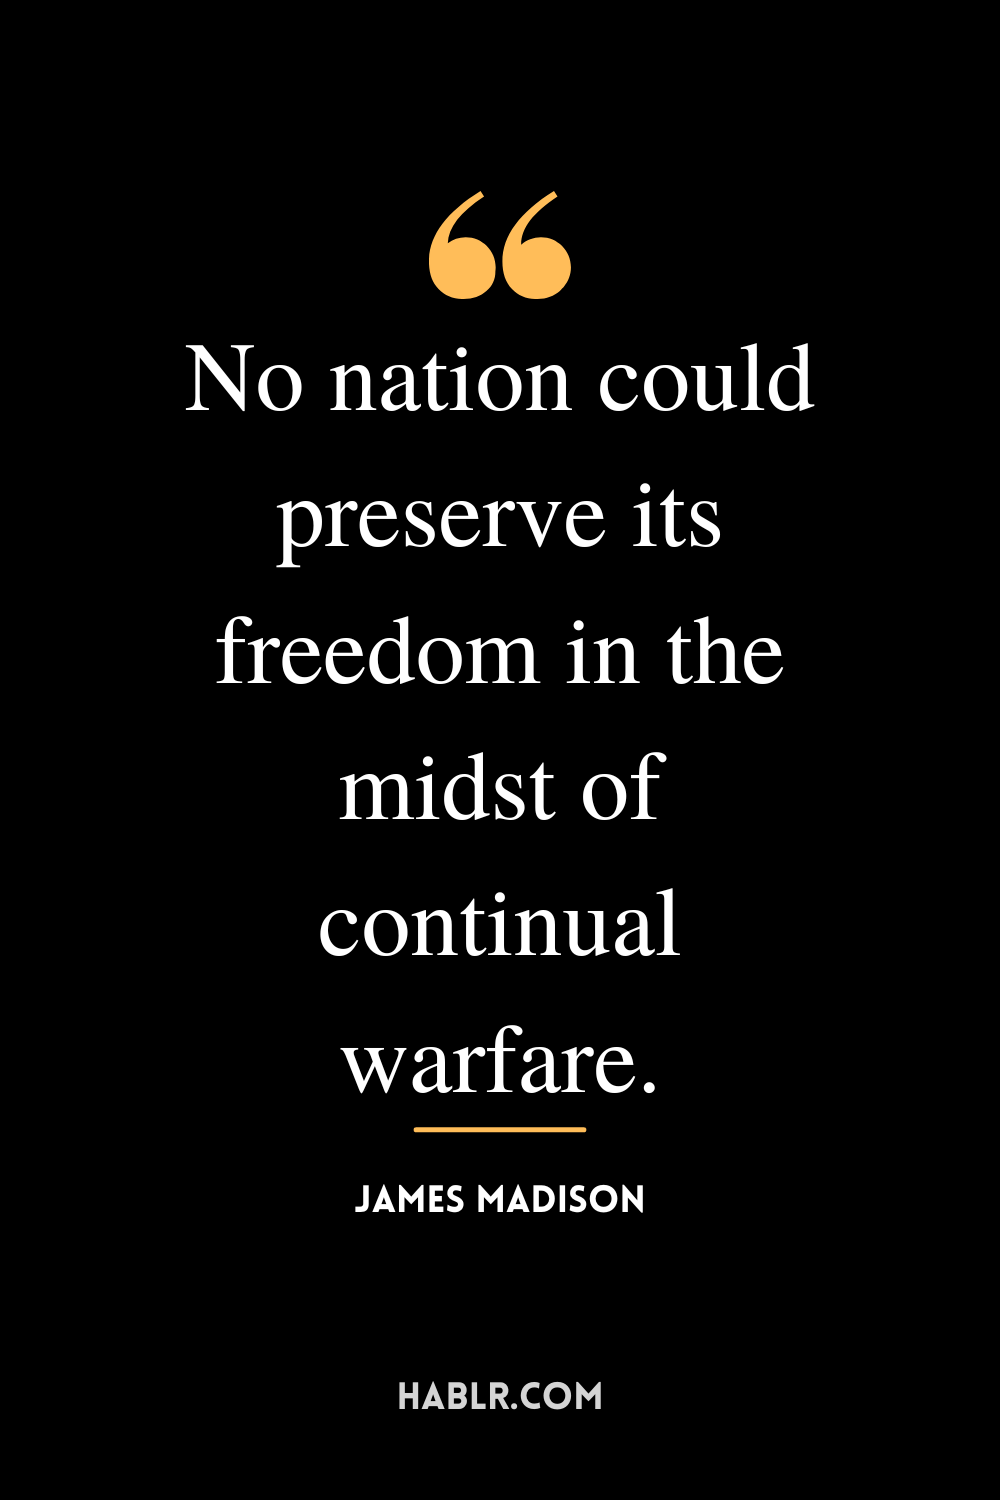 “No nation could preserve its freedom in the midst of continual warfare.” -James Madison